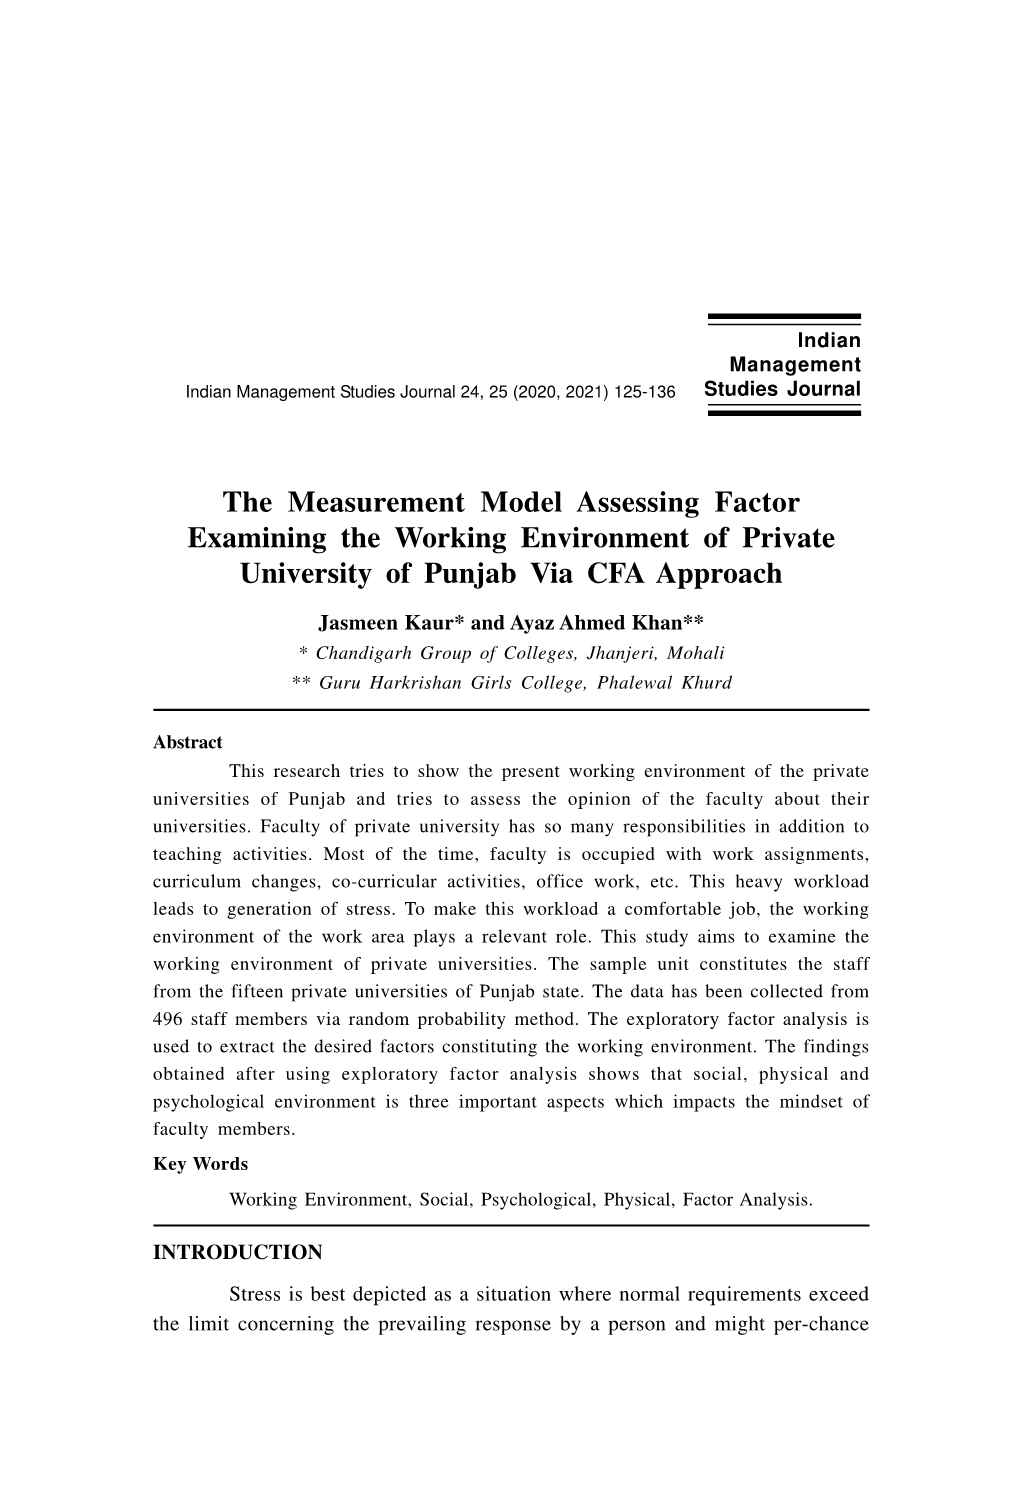 The Measurement Model Assessing Factor Examining the Working Environment of Private University of Punjab Via CFA Approach